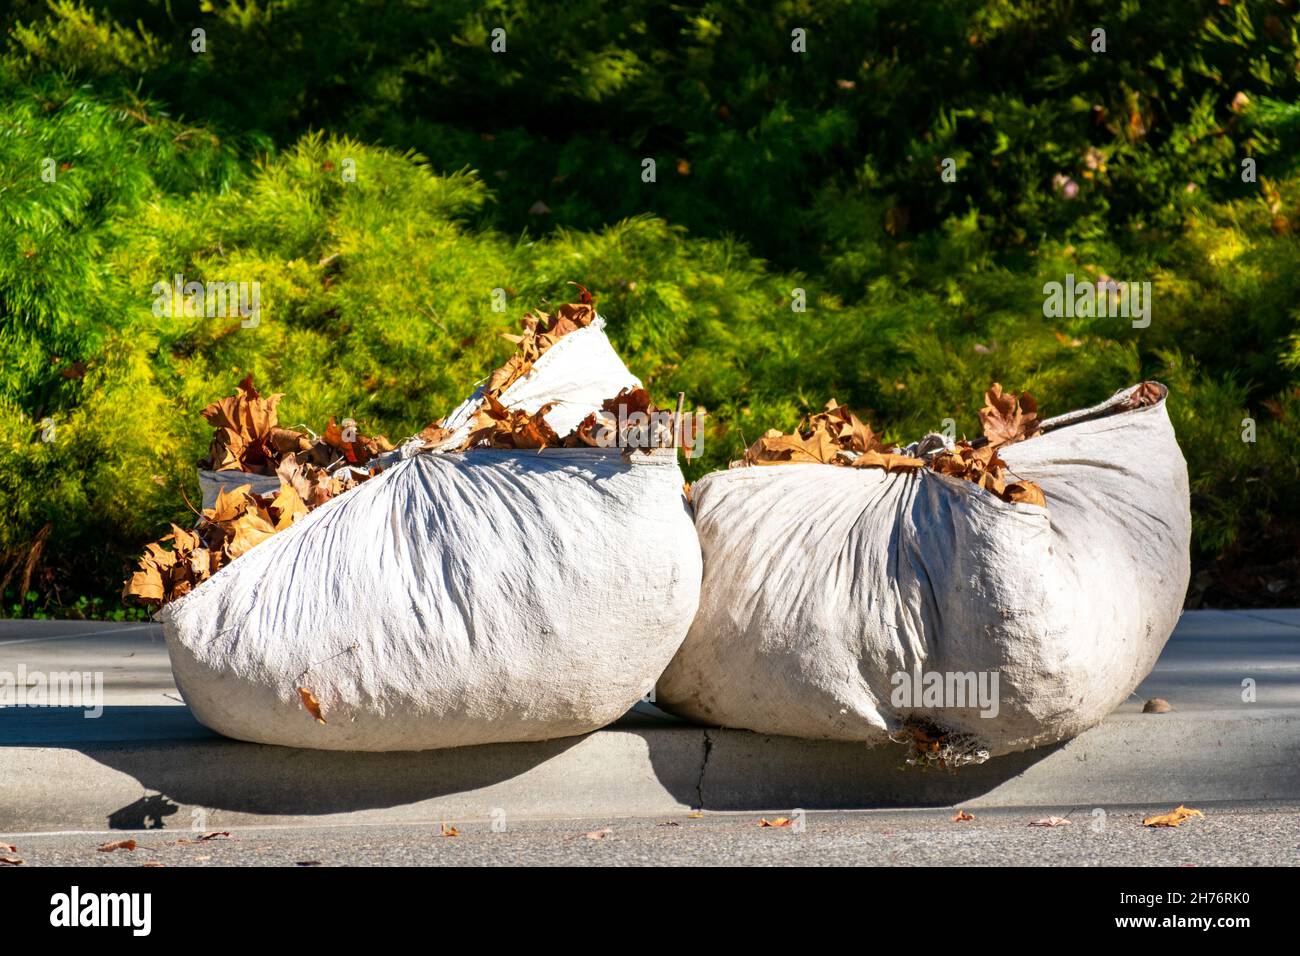 Raked up and collected fallen autumn leaves, tightly bound in two white plastic tarps awaiting transportation to the compost pile or landfill site. Stock Photo